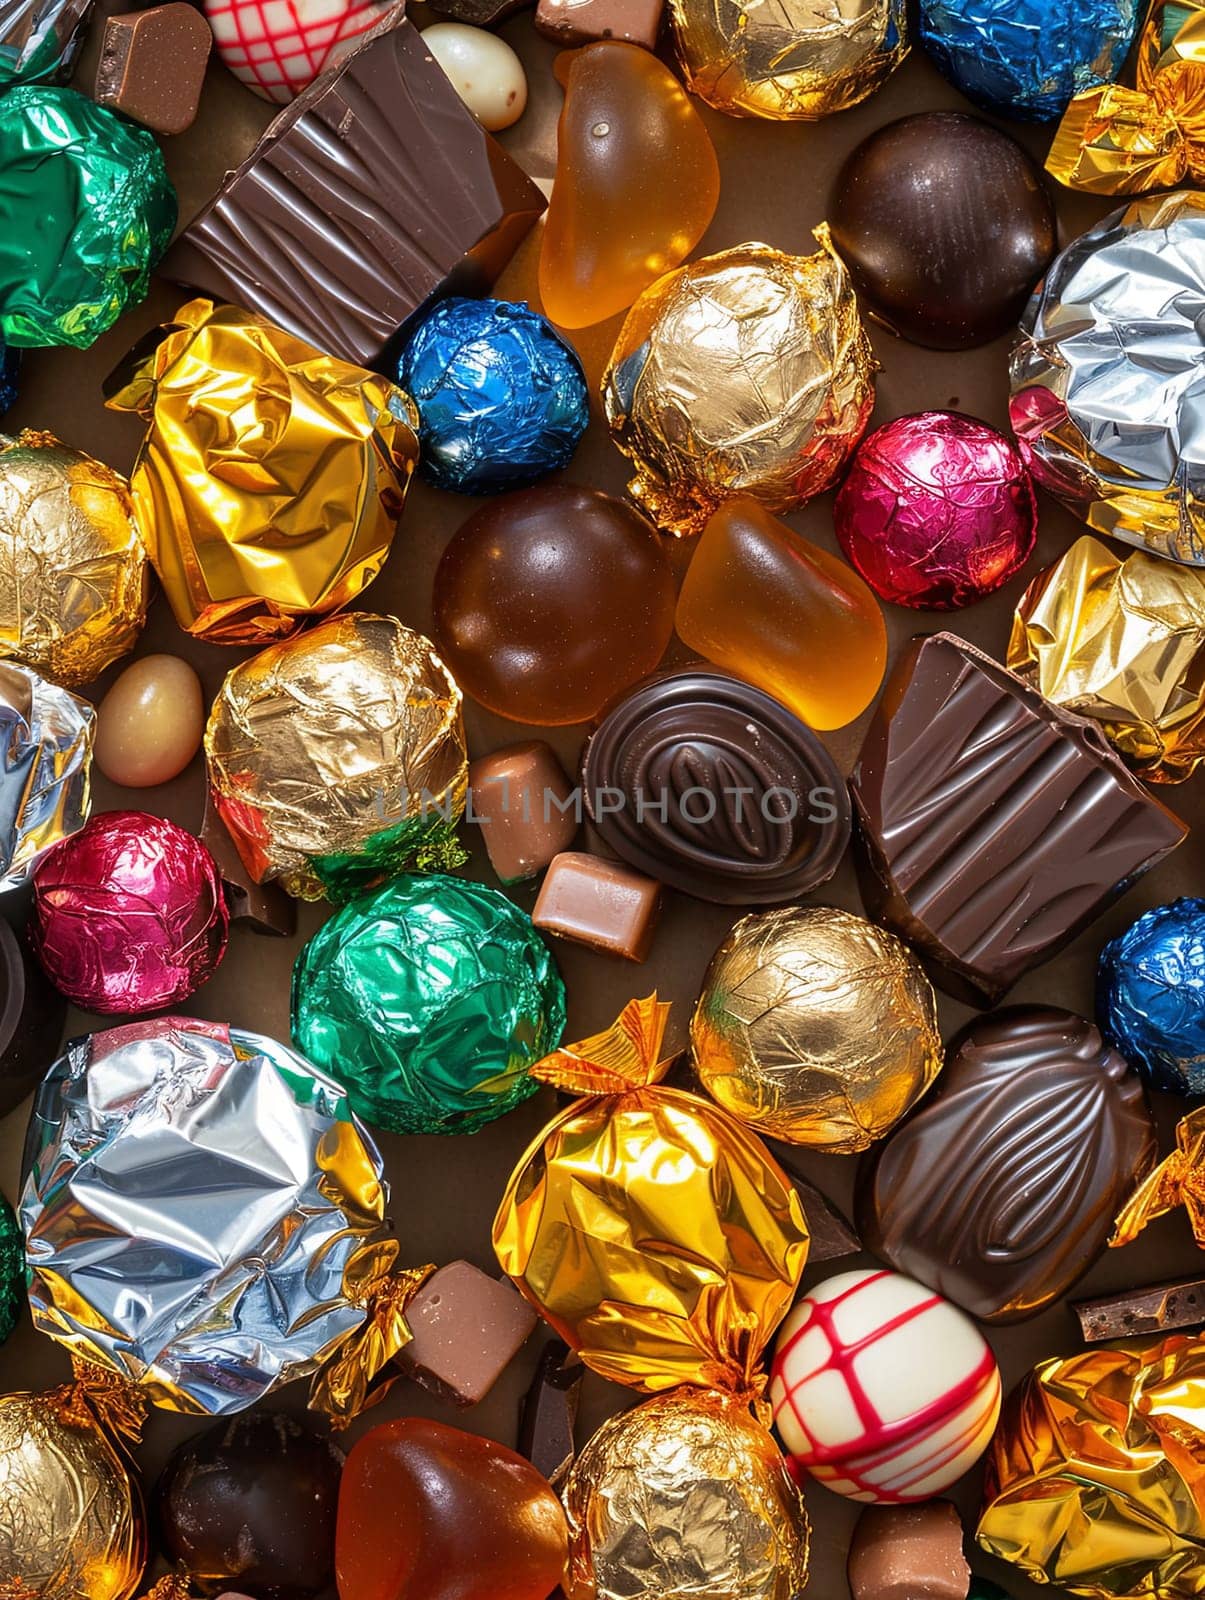 Various types of colorful chocolate candies spread out on a table, showcasing vibrant colors and shiny wrappers.